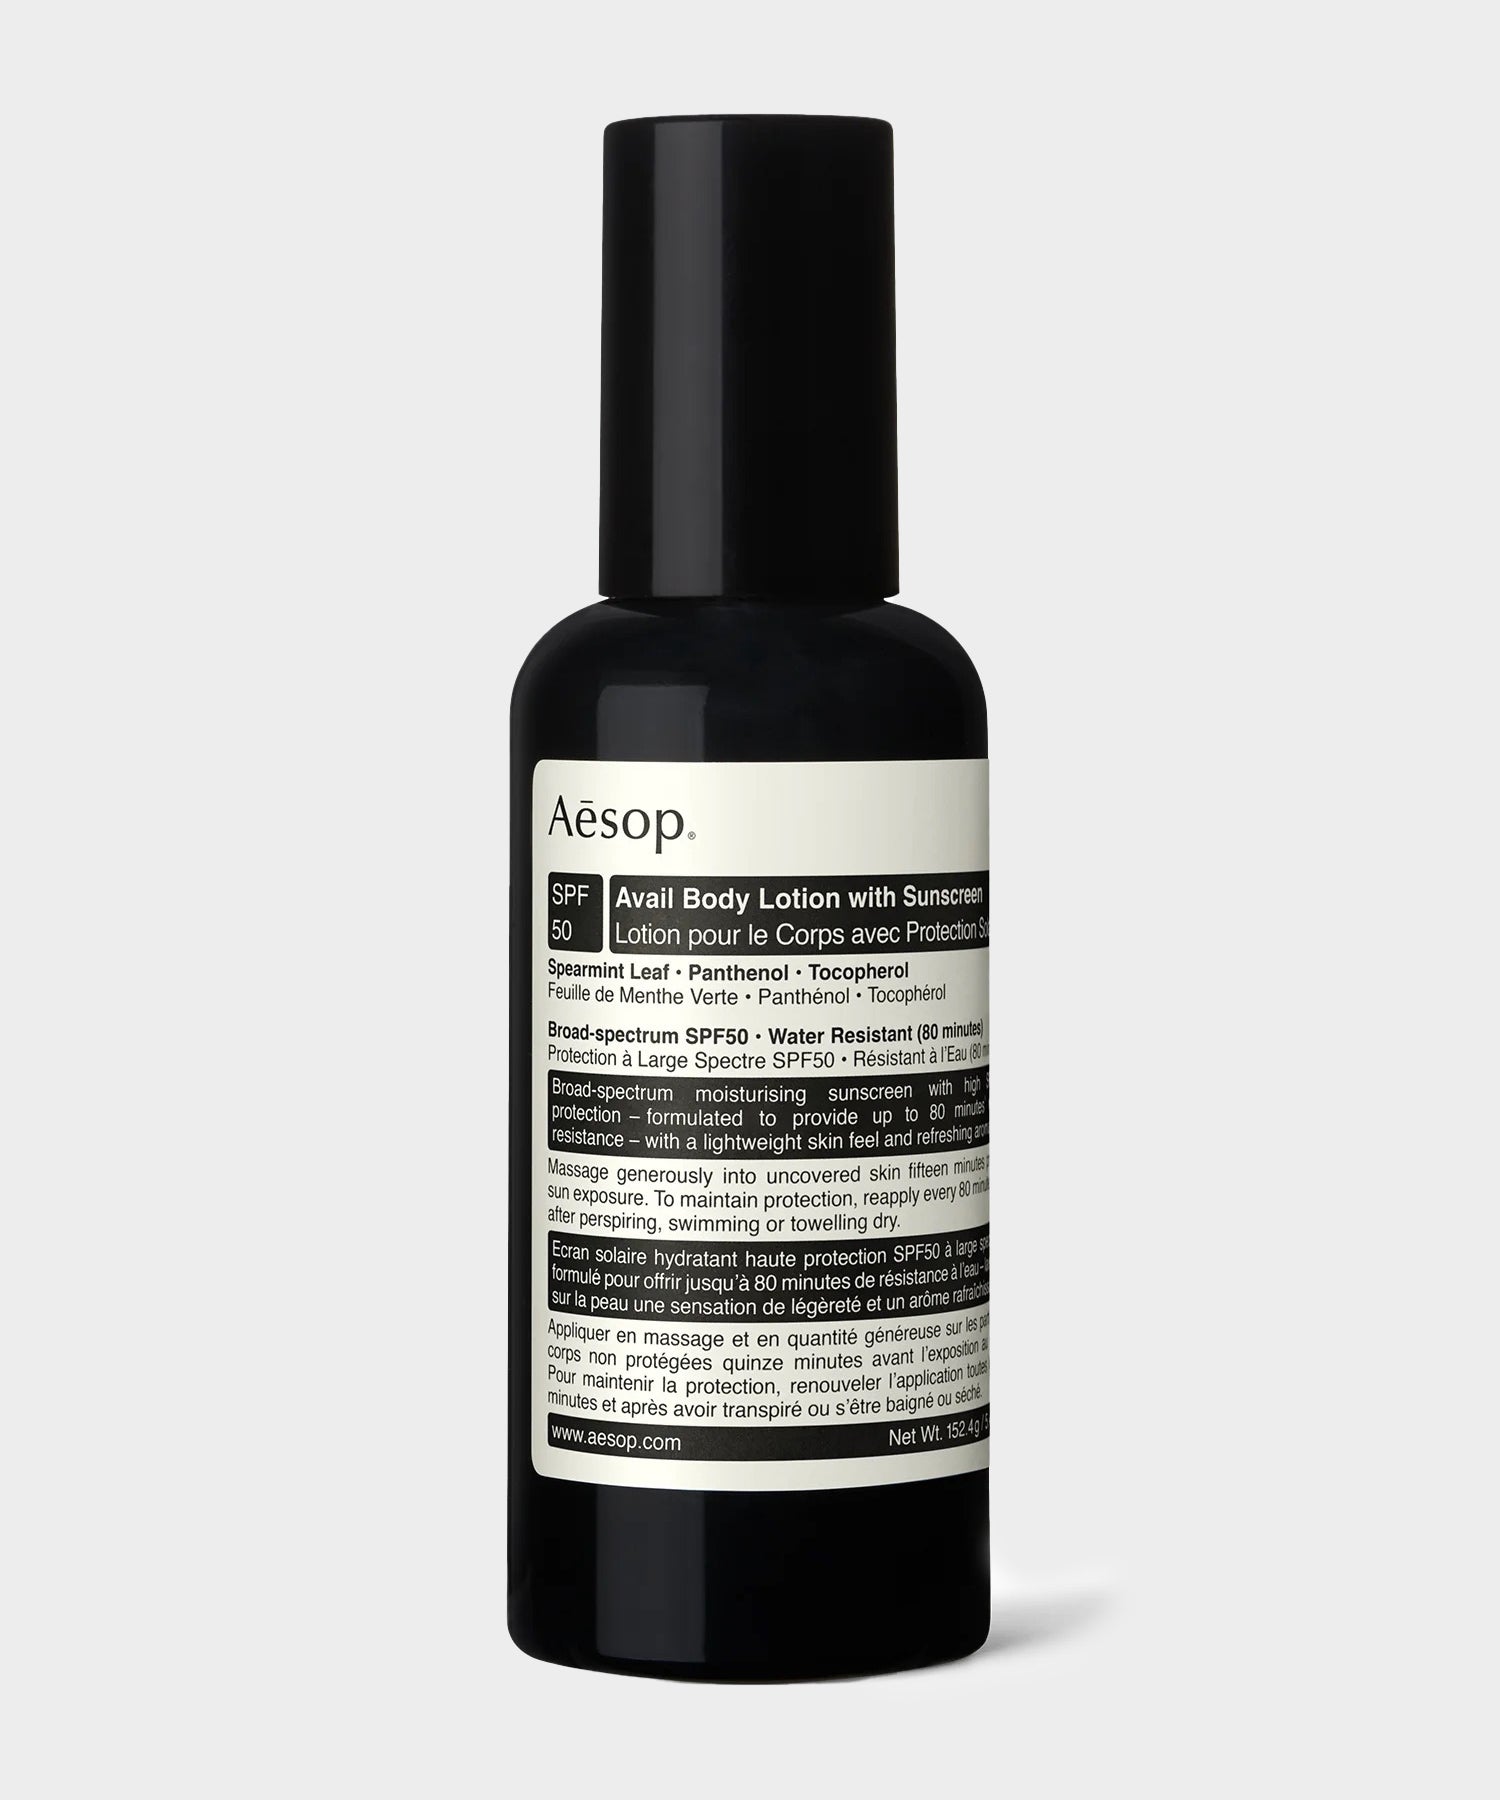 Aesop Avail Body Lotion SPF50 150mL